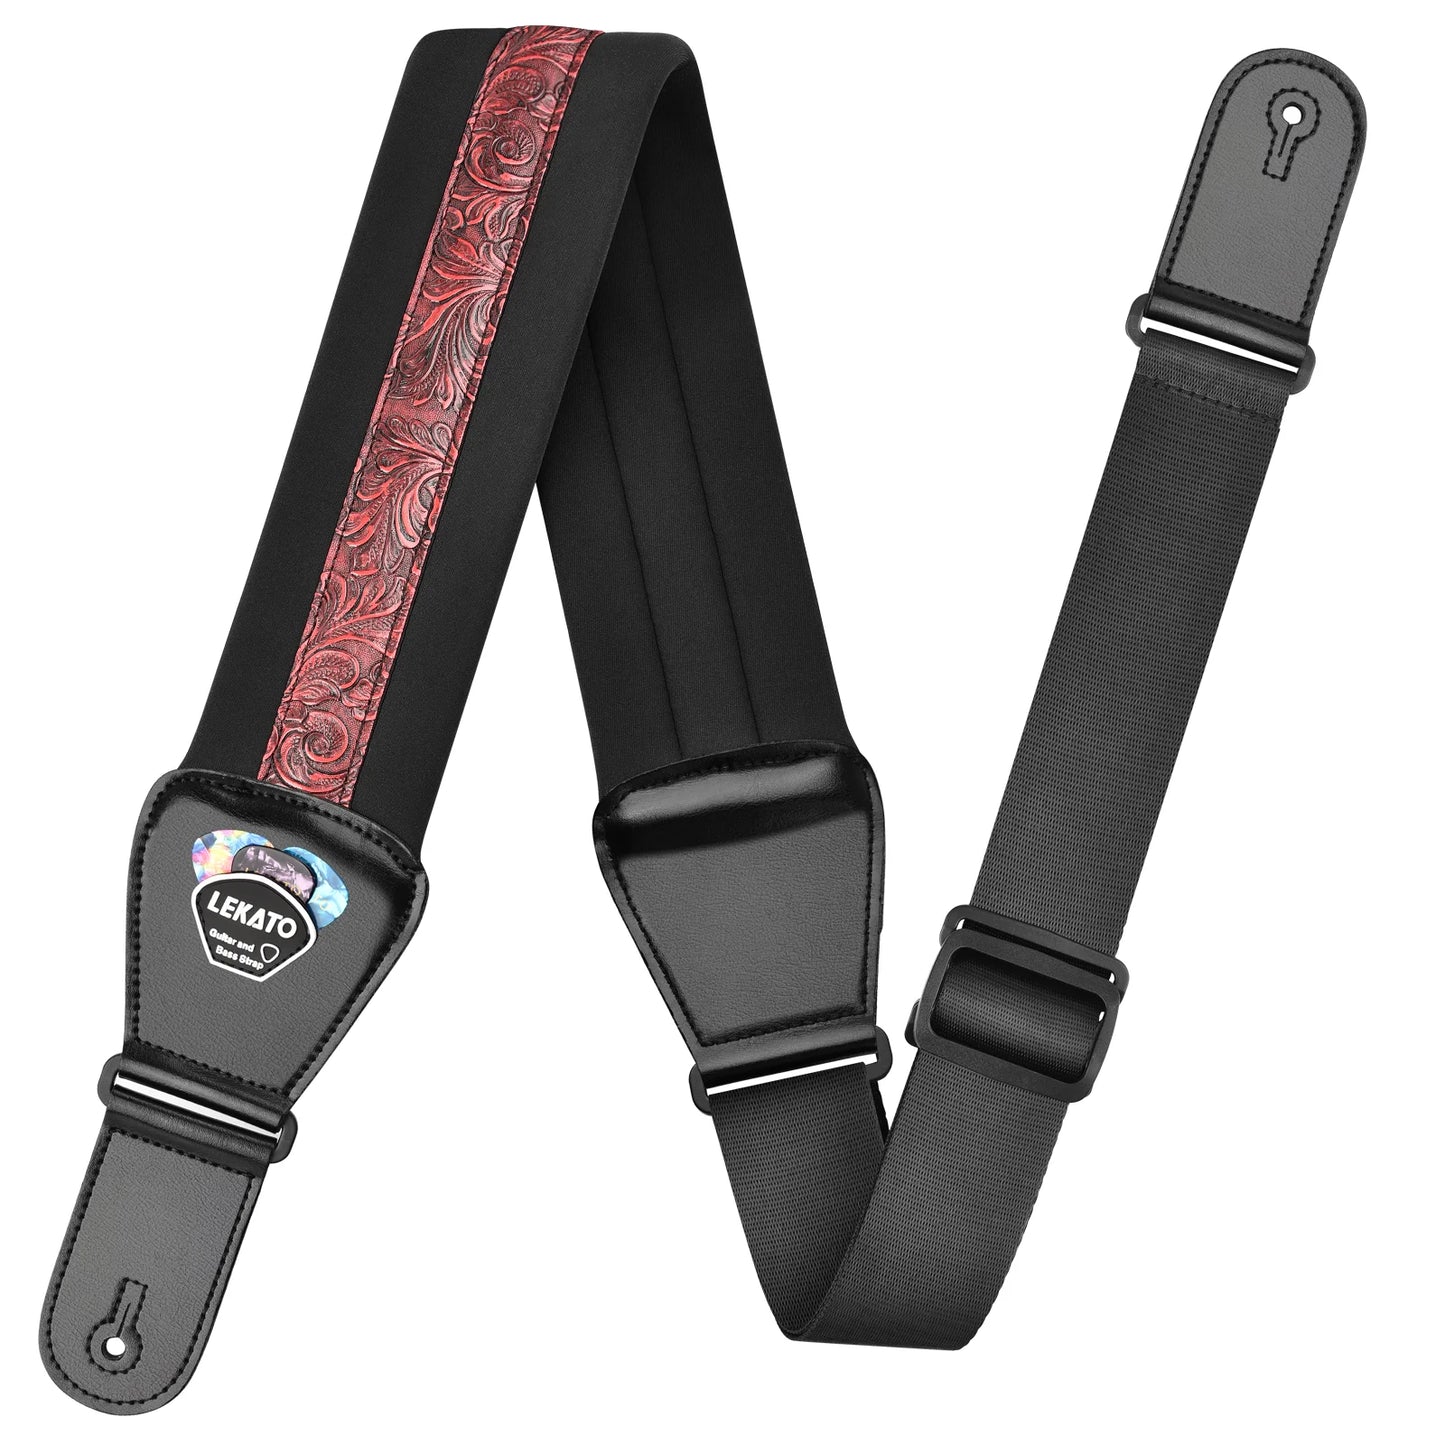 LEKATO LGS-2 Electric Guitar Strap with Memory Foam Padding, Adjustable Length and Pick Holder - Perfect for All Guitarists